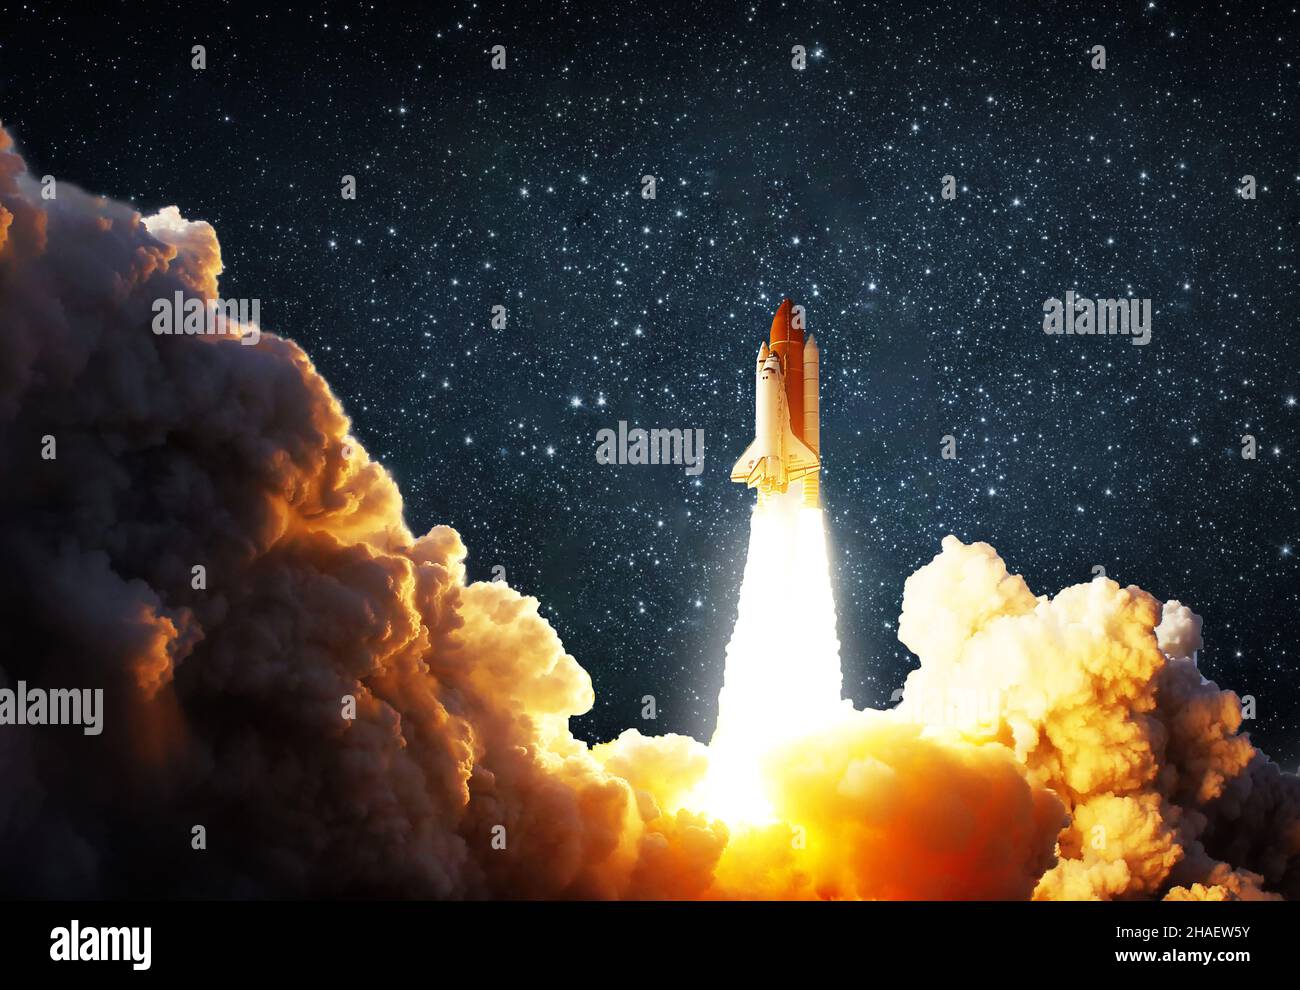 Spaceship or rocket on mission gas starting. Elements of image by NASA Stock Photo